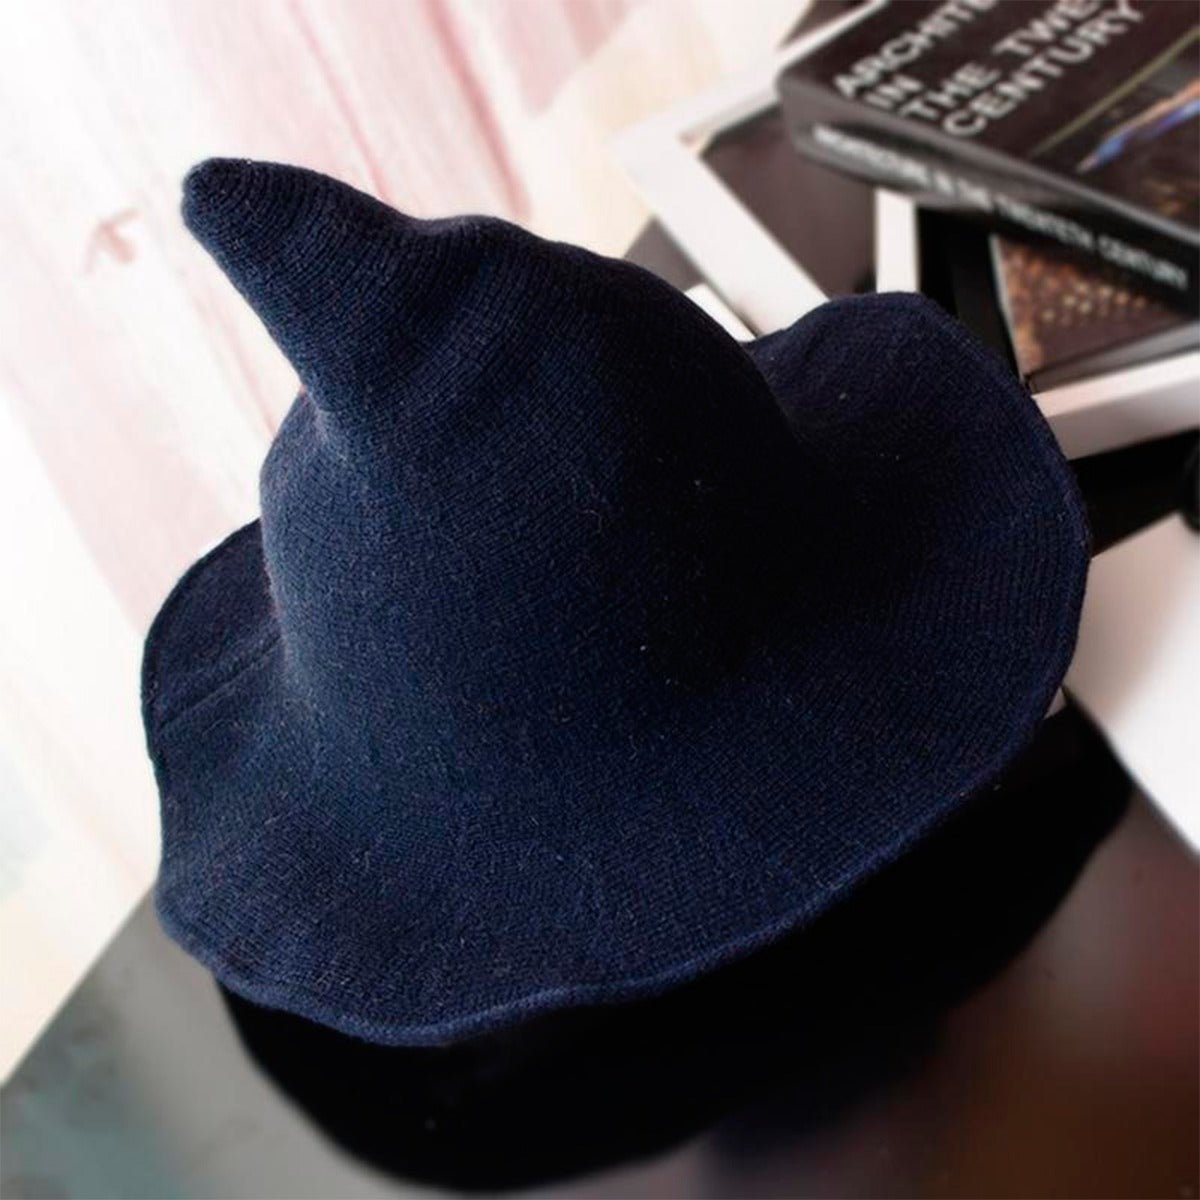 Blue Wool Witches Hat - 13 Moons